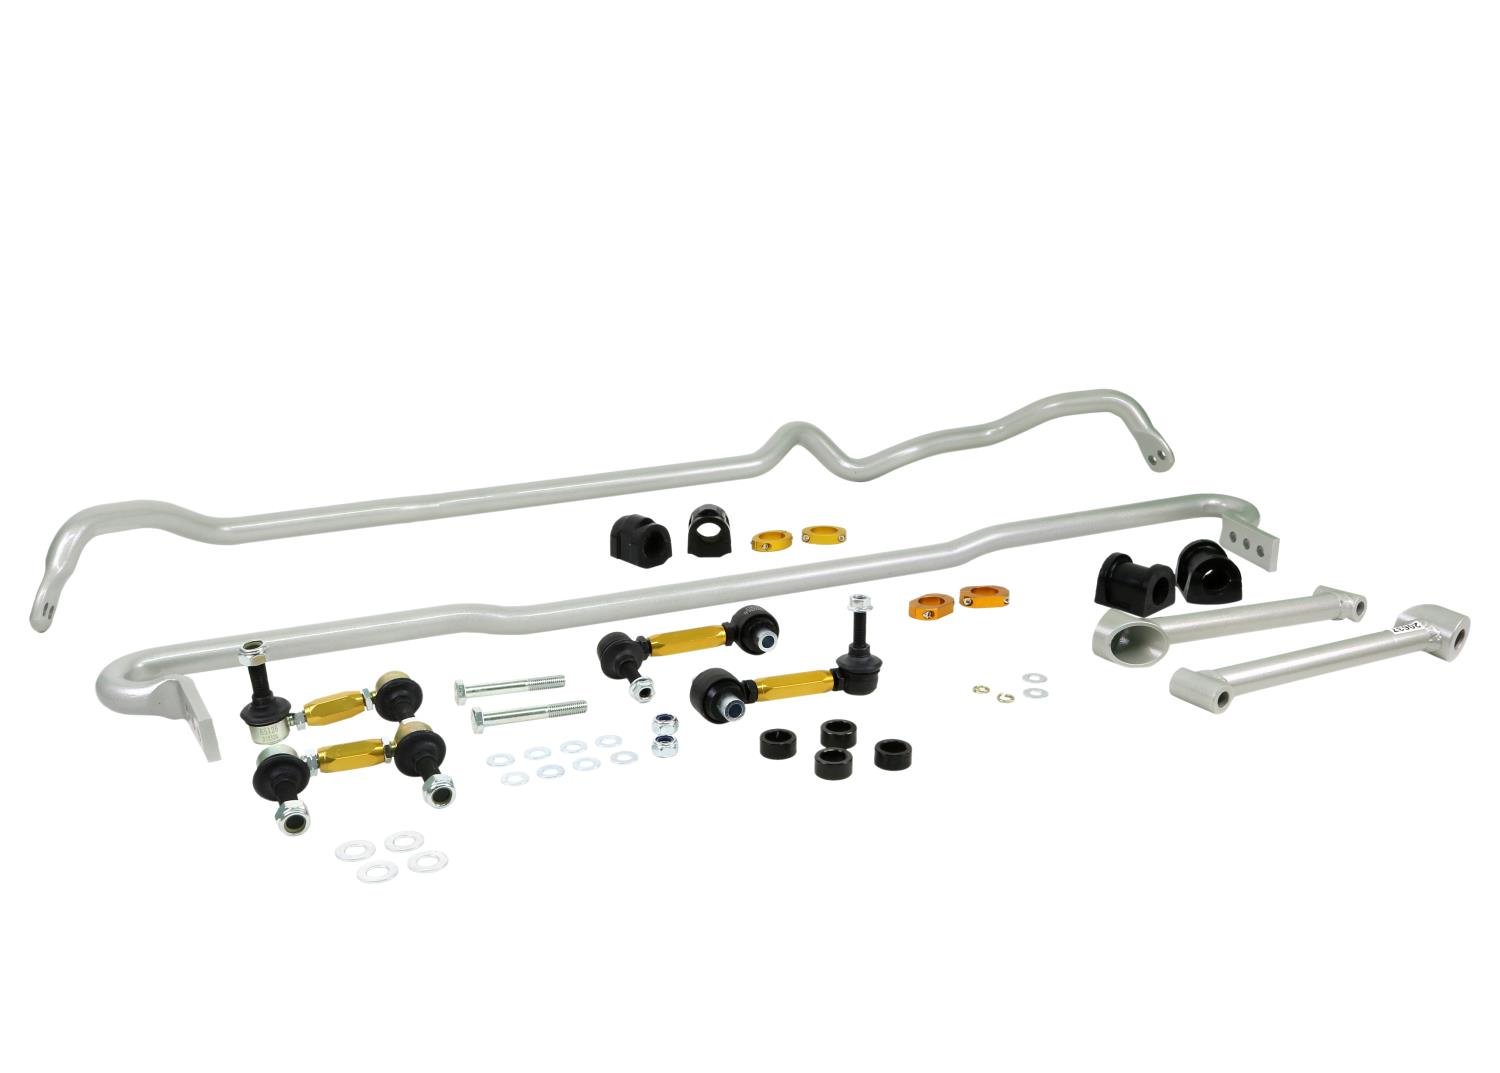 BSK018 Front And Rear Sway Bar Kit for 2015-2016 Subaru Forester XT 2.0 Premium